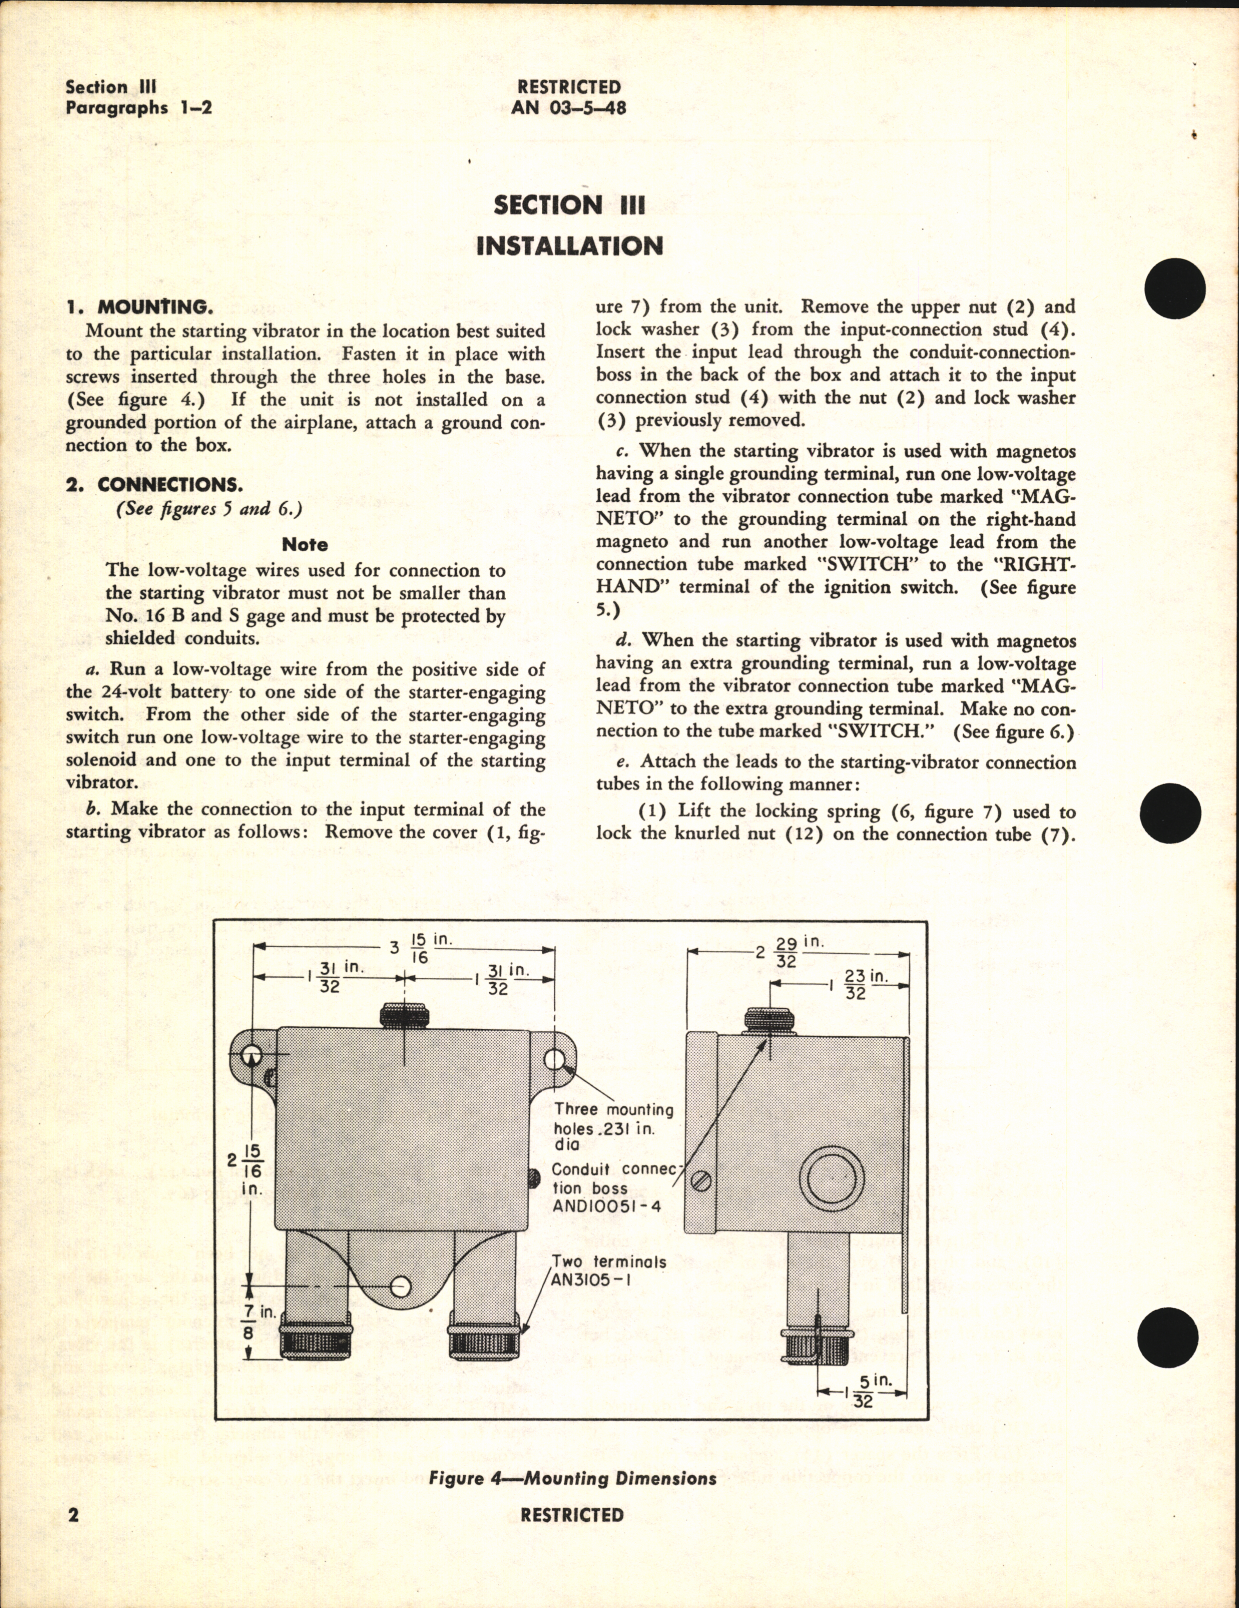 Sample page 6 from AirCorps Library document: Handbook of Instructions with Parts Catalog for Starting Vibrators 70G7 and 70G7G3